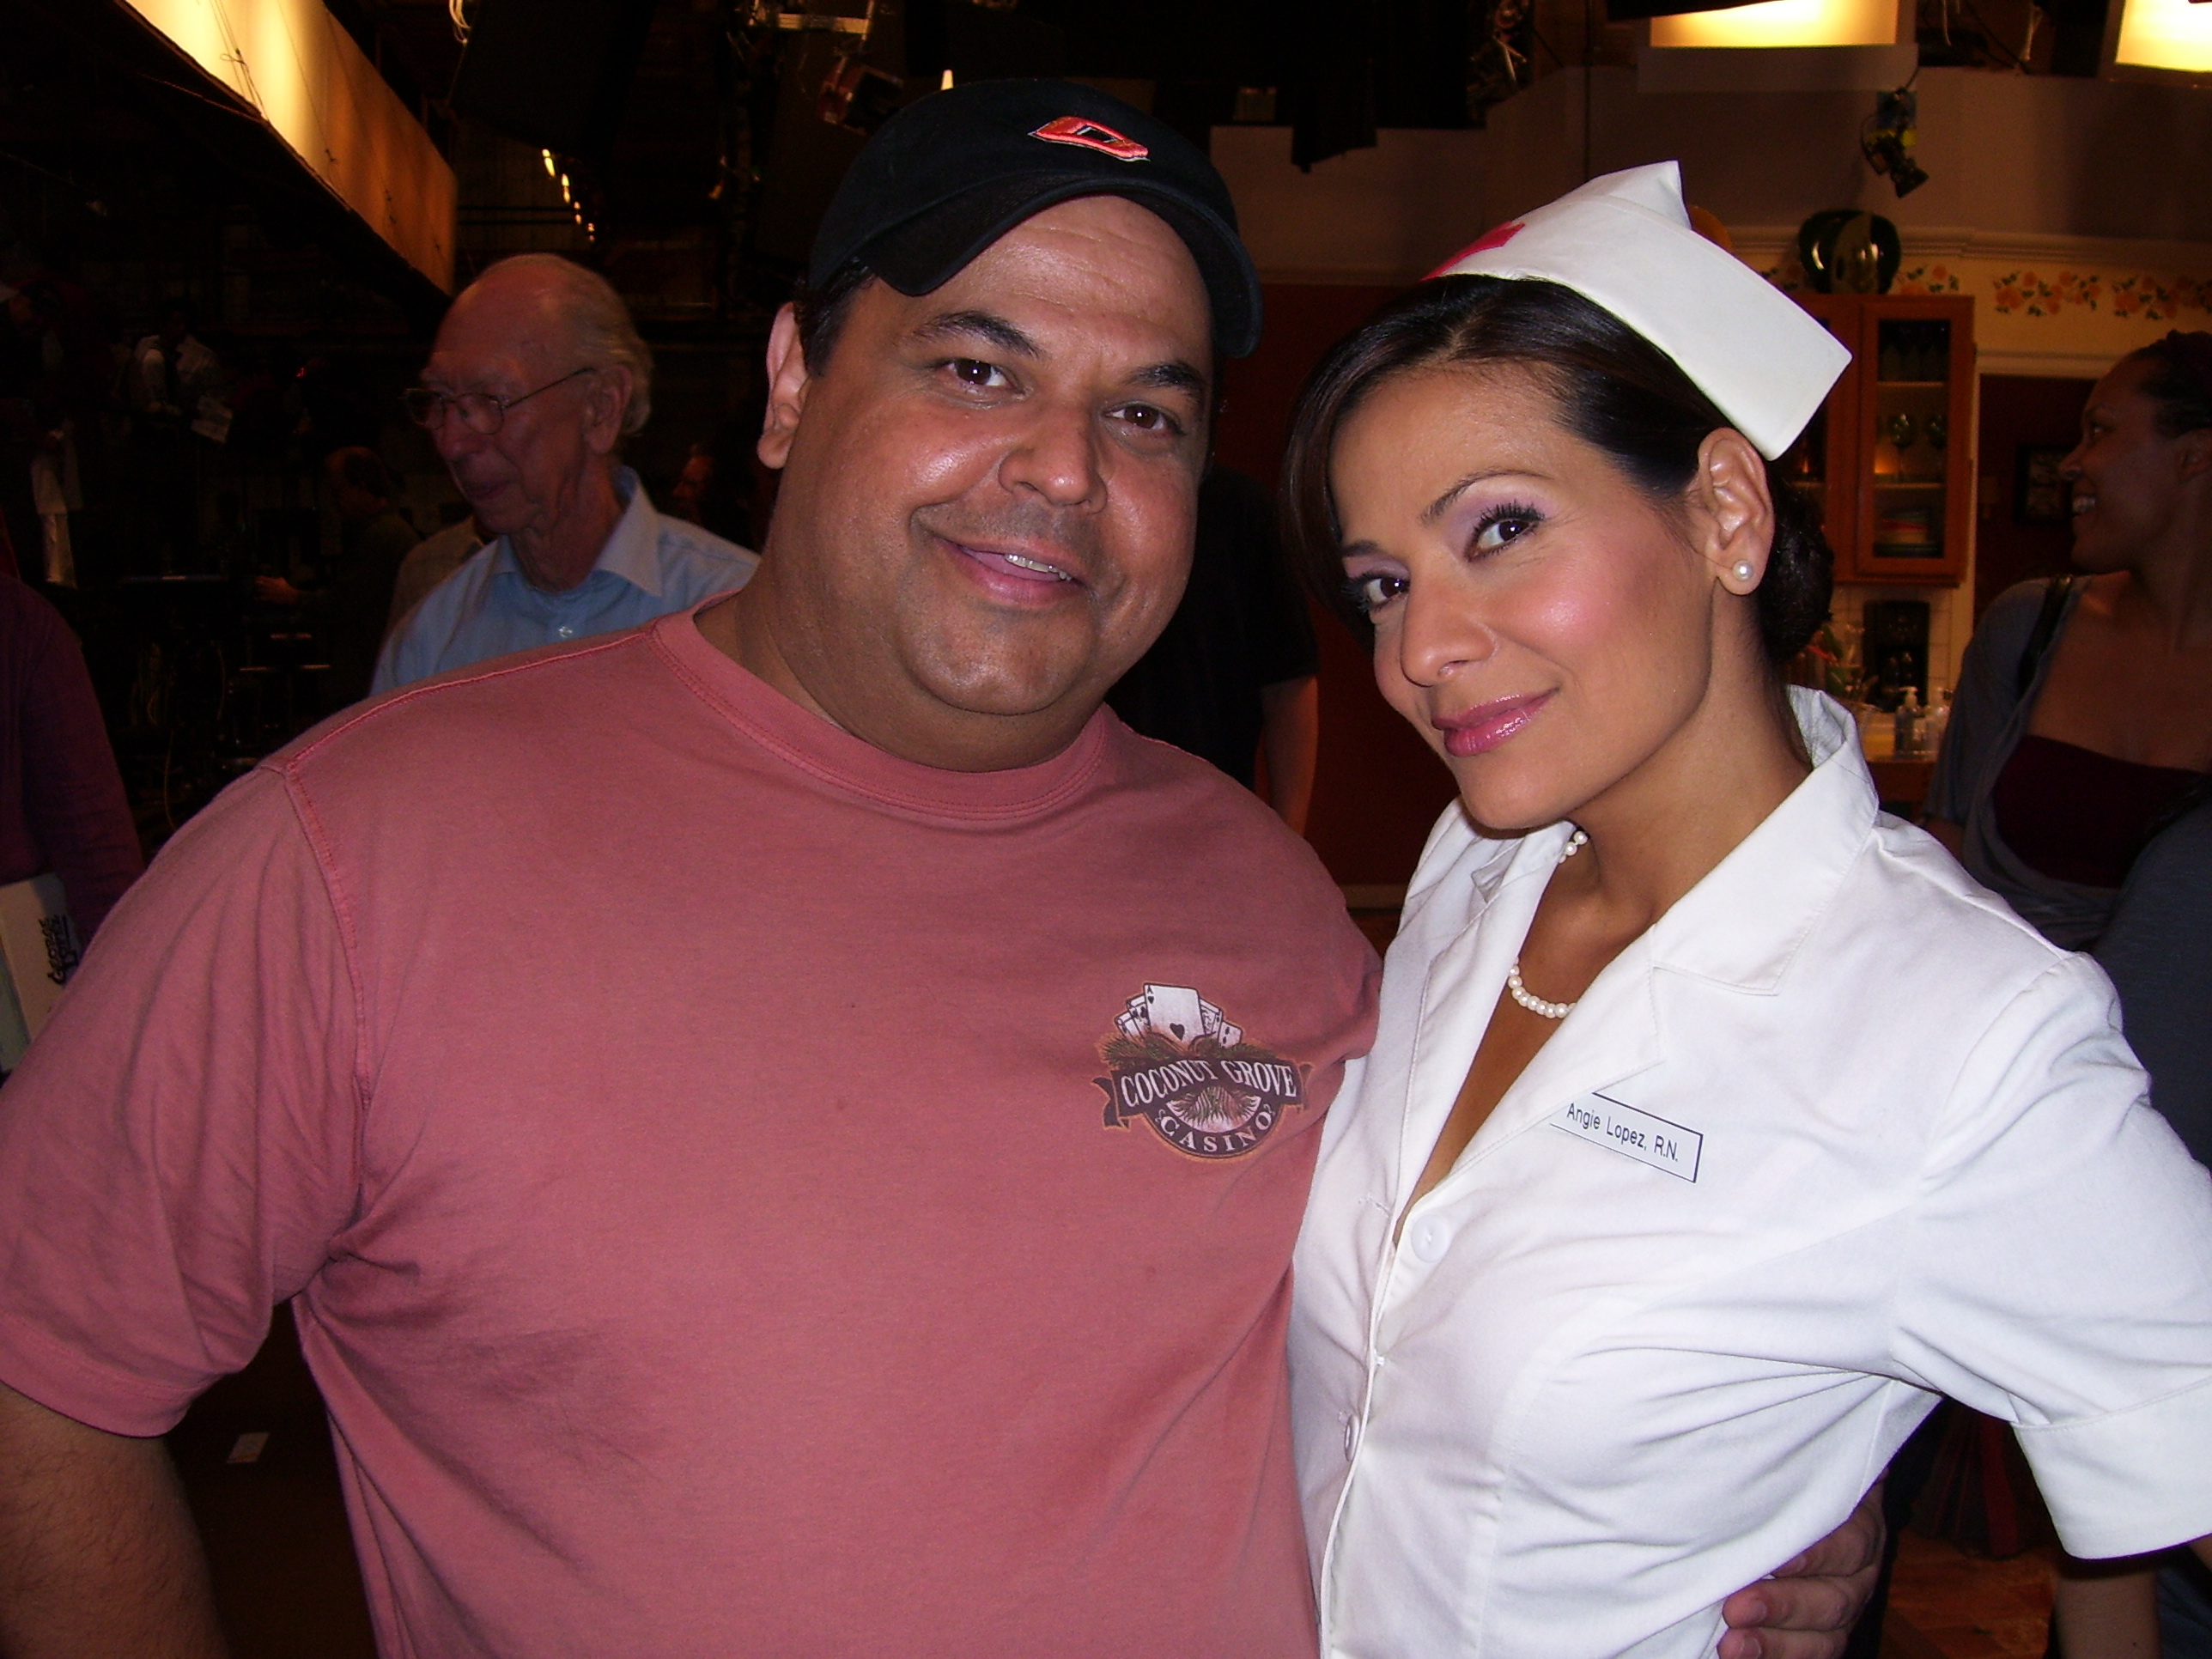 Frank Crim with Constance Marie after taping the George Lopez Show.